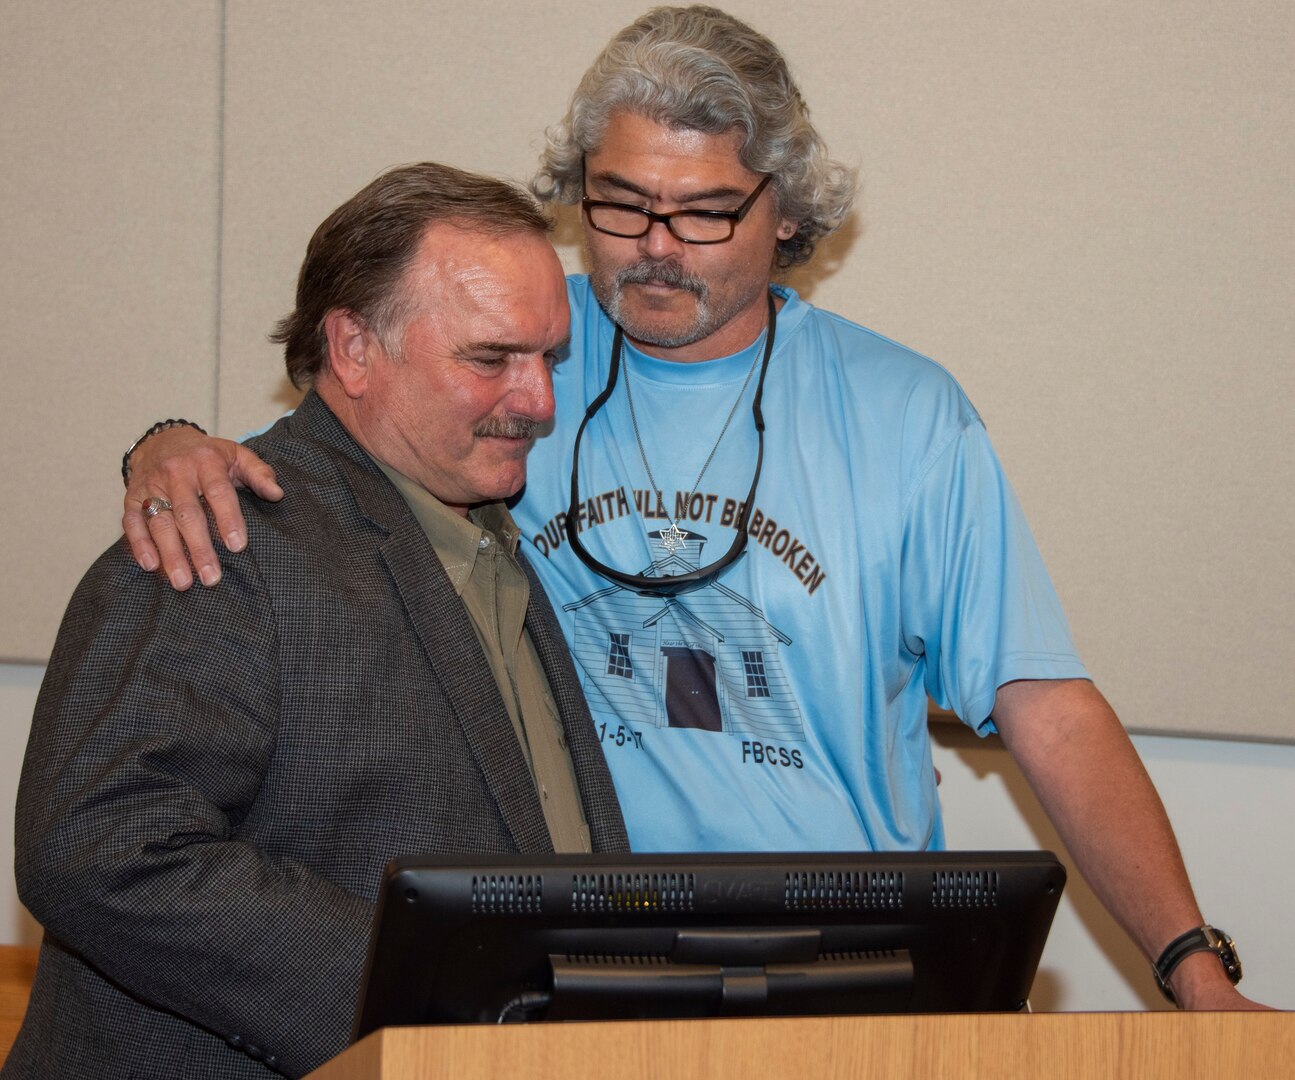 Juan “Gunny” Macias (right) hugs David Colbath (left) during a ceremony Nov. 8 at Brooke Army Medical Center. Macias and Colbath both survived the mass shooting in Sutherland Springs, Texas, Nov. 5, 2017. They both recovered from their injuries at BAMC along with 6 others who were injured during the shooting.